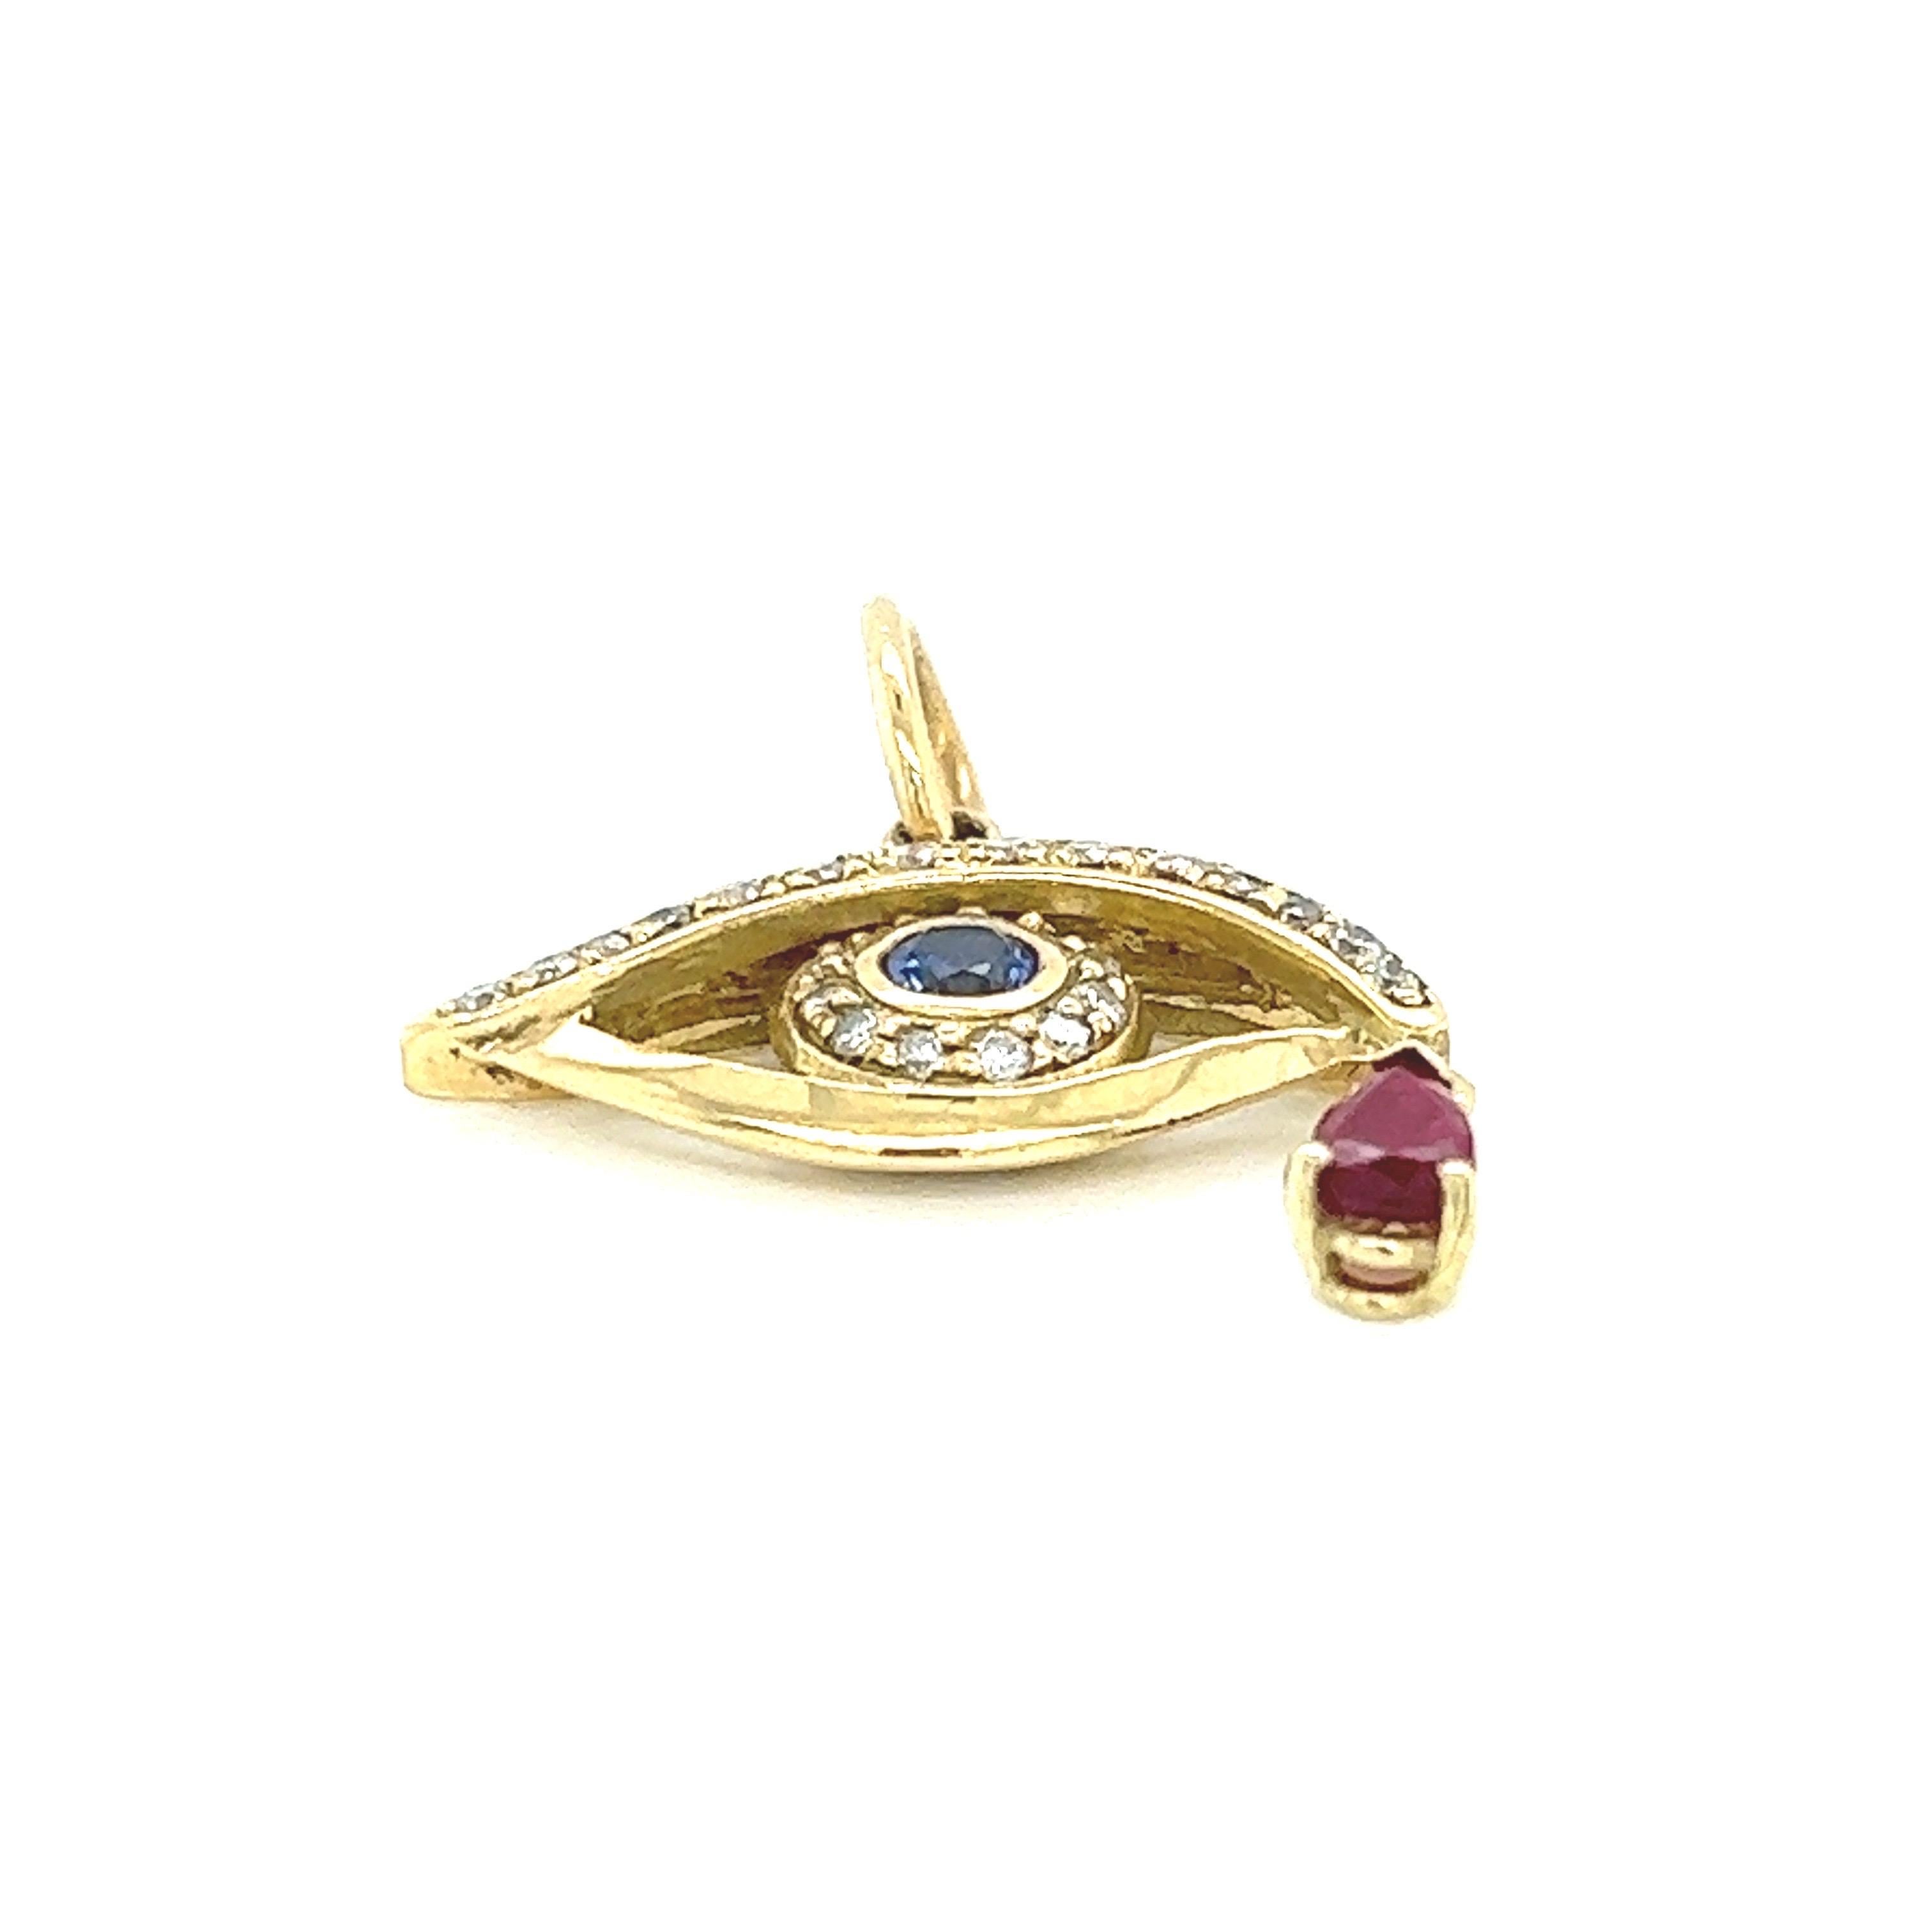 Lois D. Sasson Design

This stunning eye pendant is a masterpiece crafted in 18k yellow gold, exuding timeless elegance and luxury. The pendant features a beautiful faceted Ceylon sapphire, approximately 0.15 carats, at its center, symbolizing